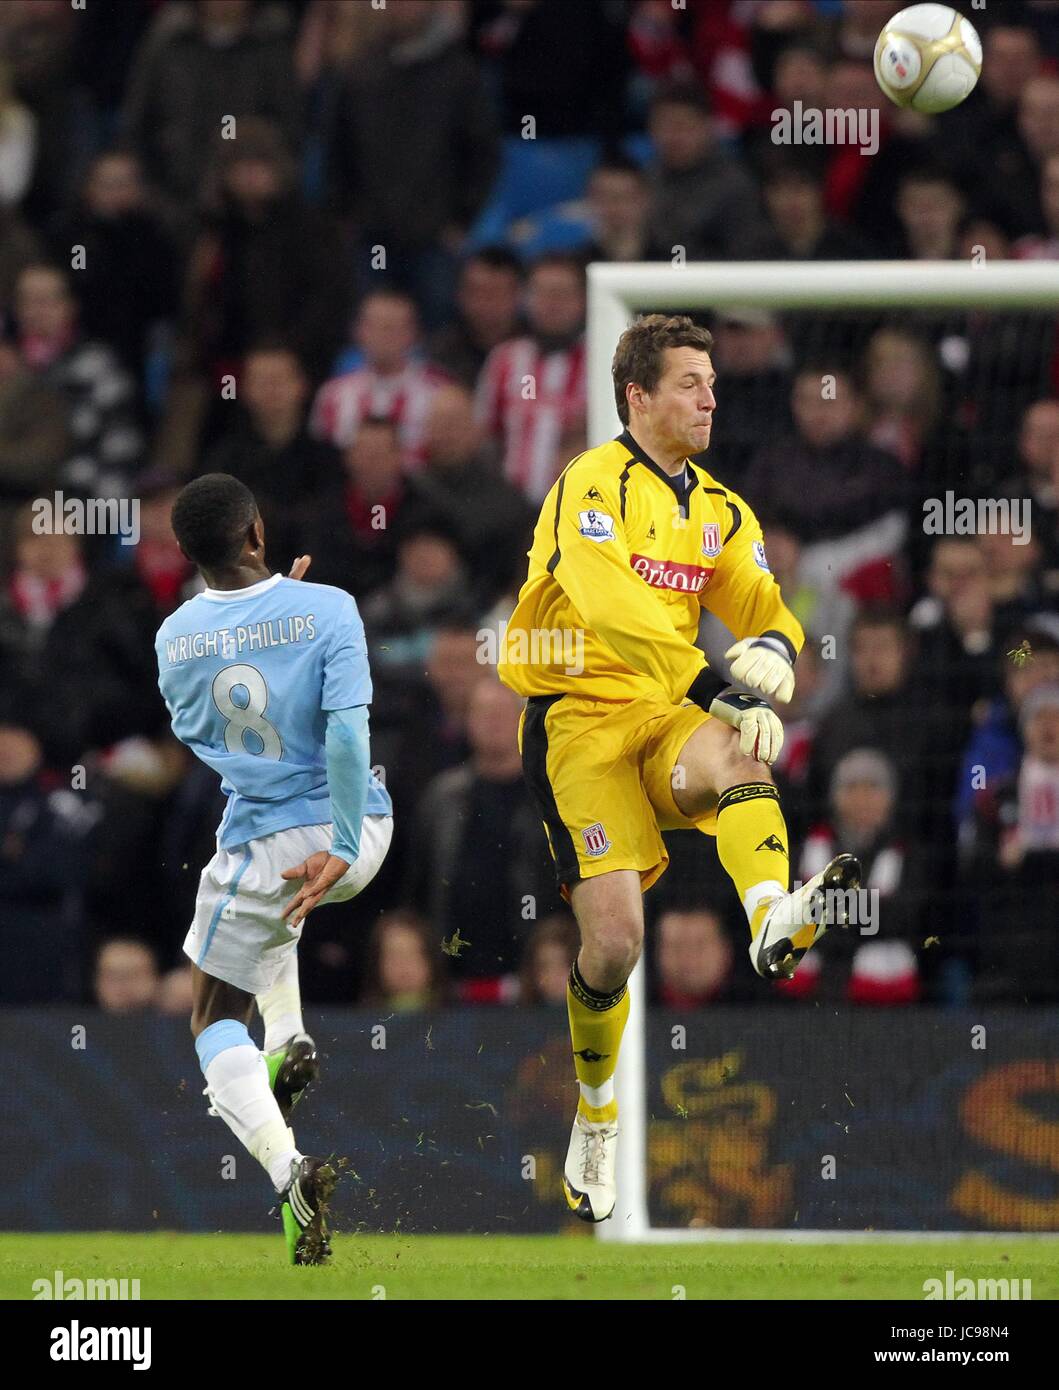 SHAUN WRIGHT PHILIPS LOBS THOM MANCHESTER CITY V STOKE CITY EASTLANDS CITY OF MANCHESTER ST MANCHESTER ENGLAND 13 February 20 Stock Photo